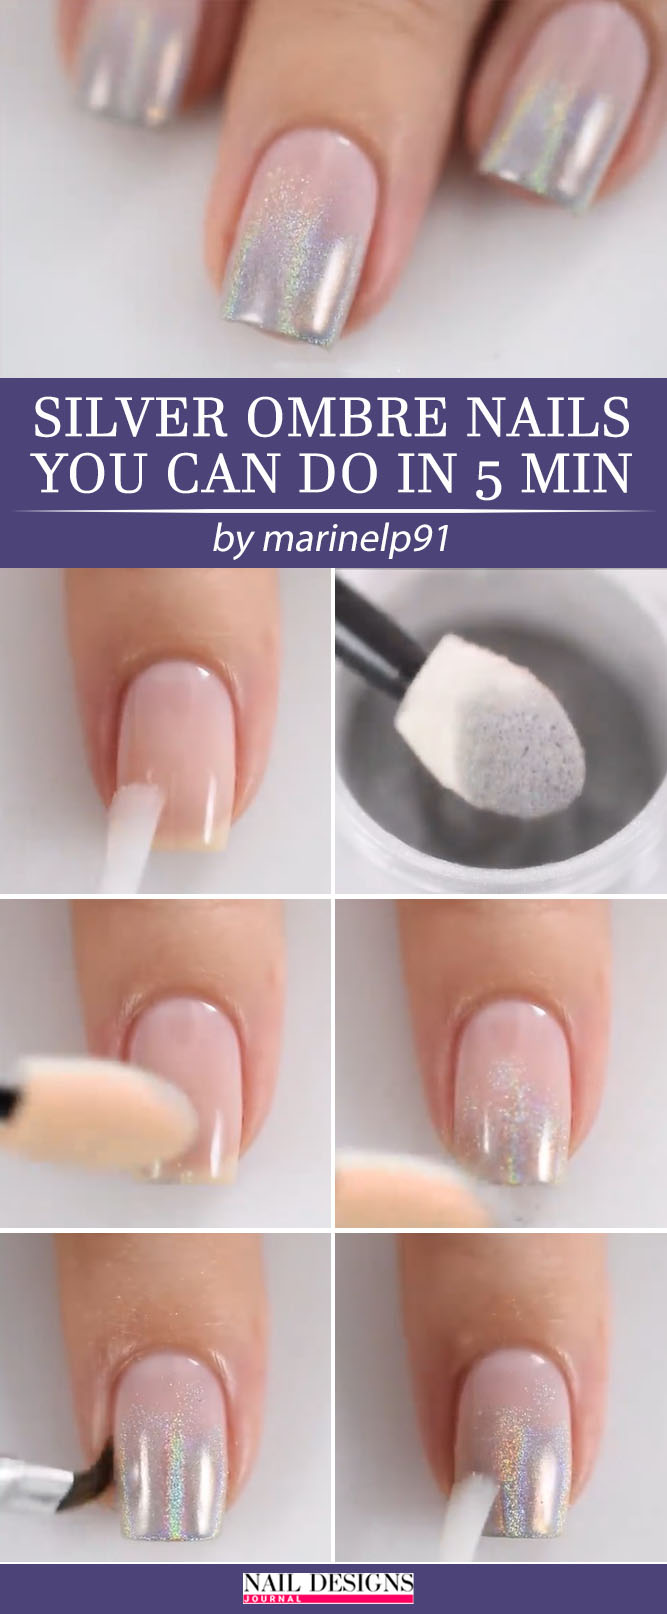 Silver Glitter Ombre Nails You Can Do In 5 Min